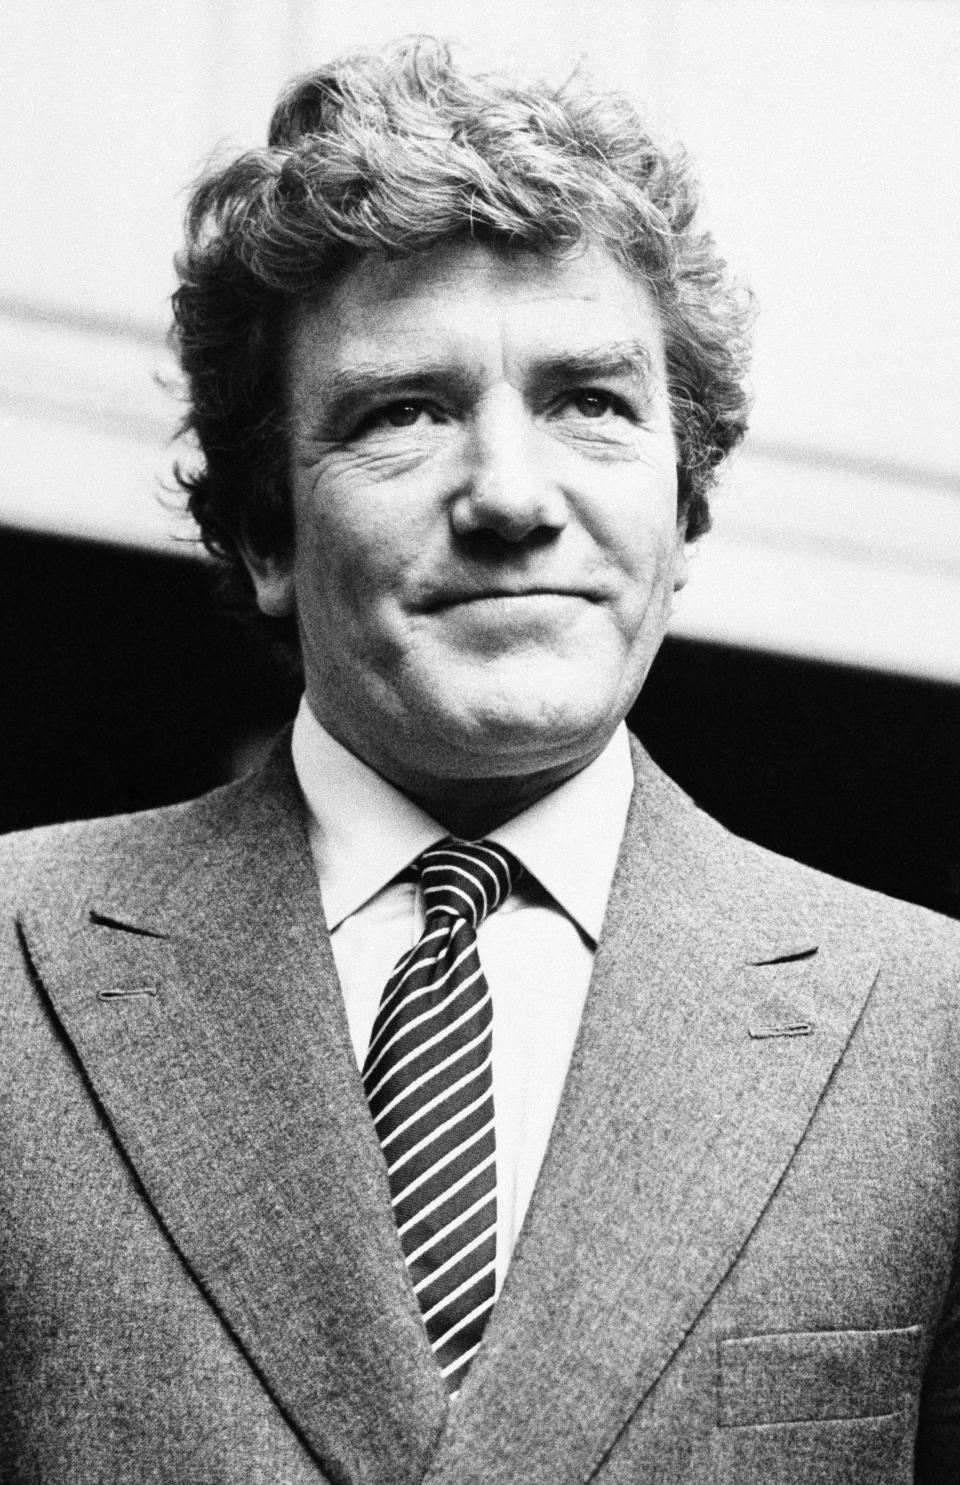 British actor Albert Finney appears in London on Sept. 18, 1980. Finney, the Academy Award-nominated star of films "Tom Jones," "Erin Brockovich," and "Skyfall," died on Feb. 8 at age 82. (AP Photo)